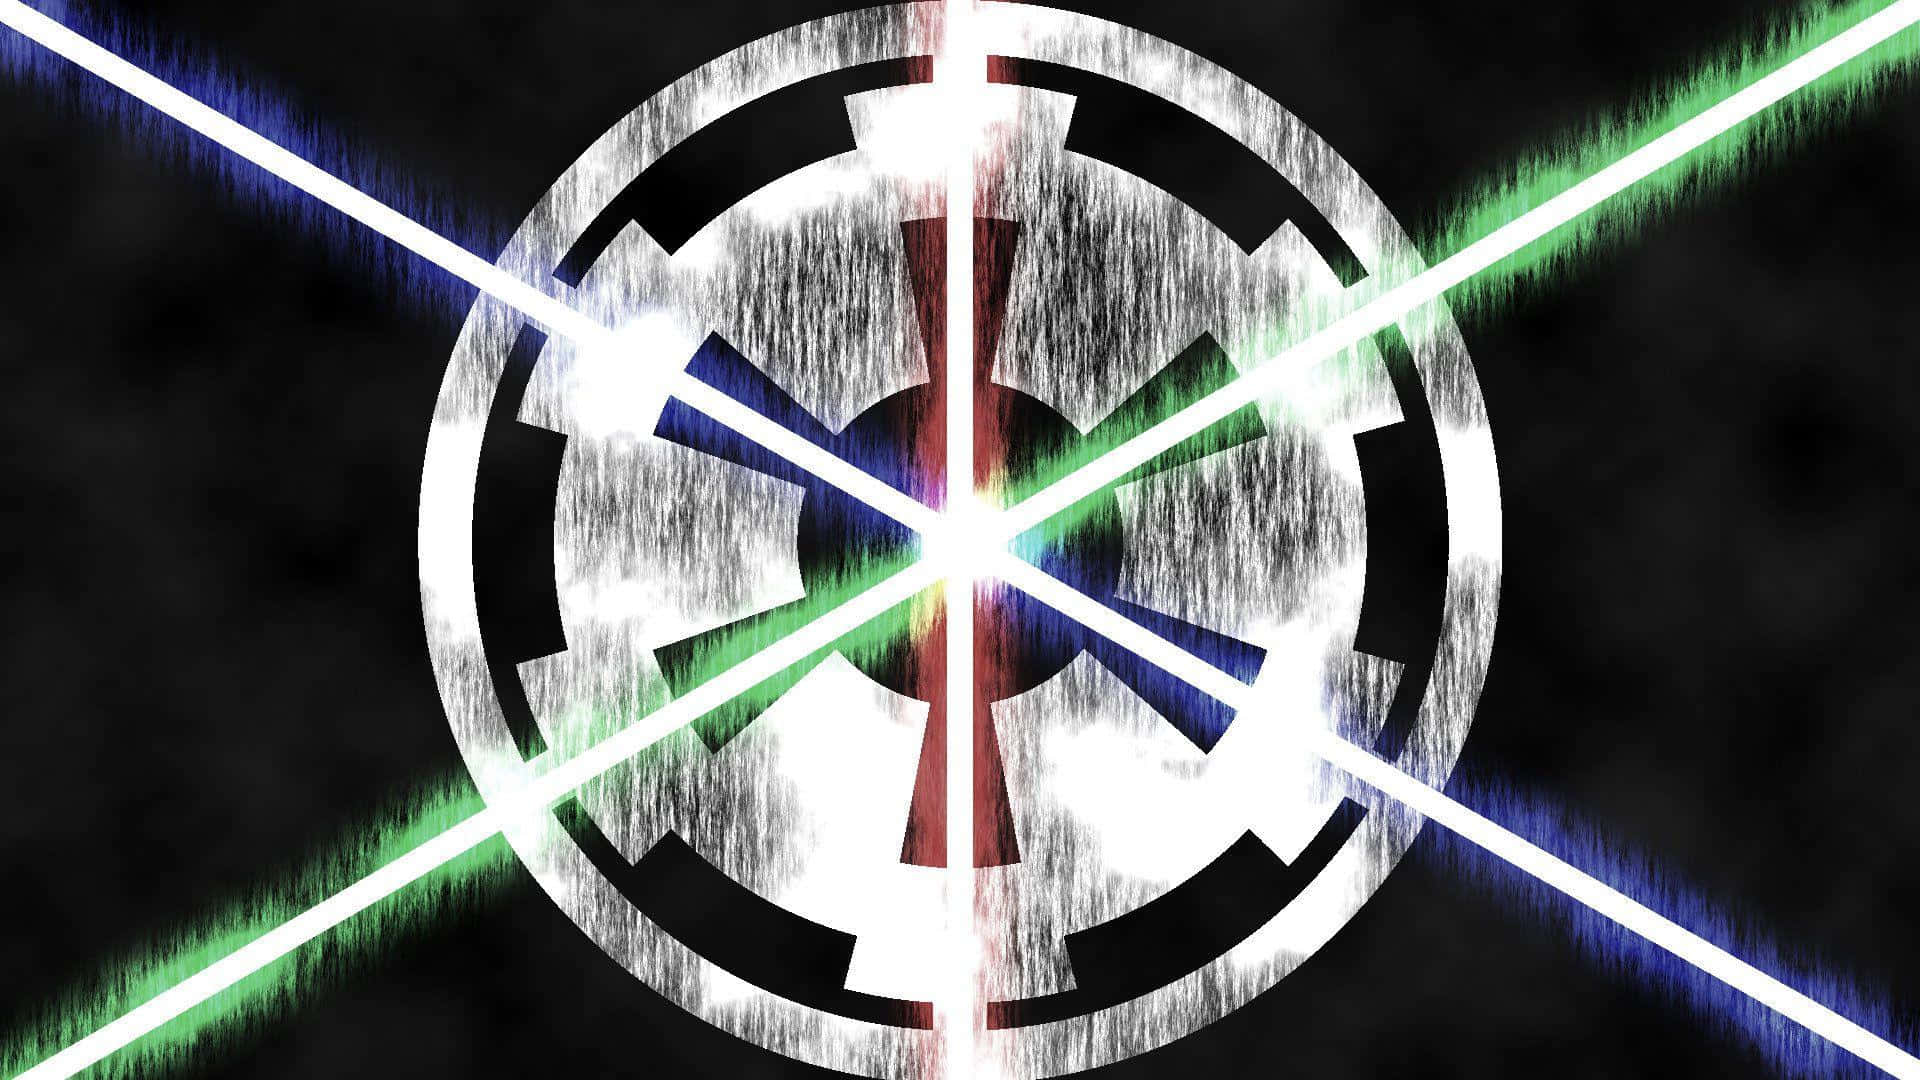 Iconisk Star Wars-imperiale logo. Wallpaper